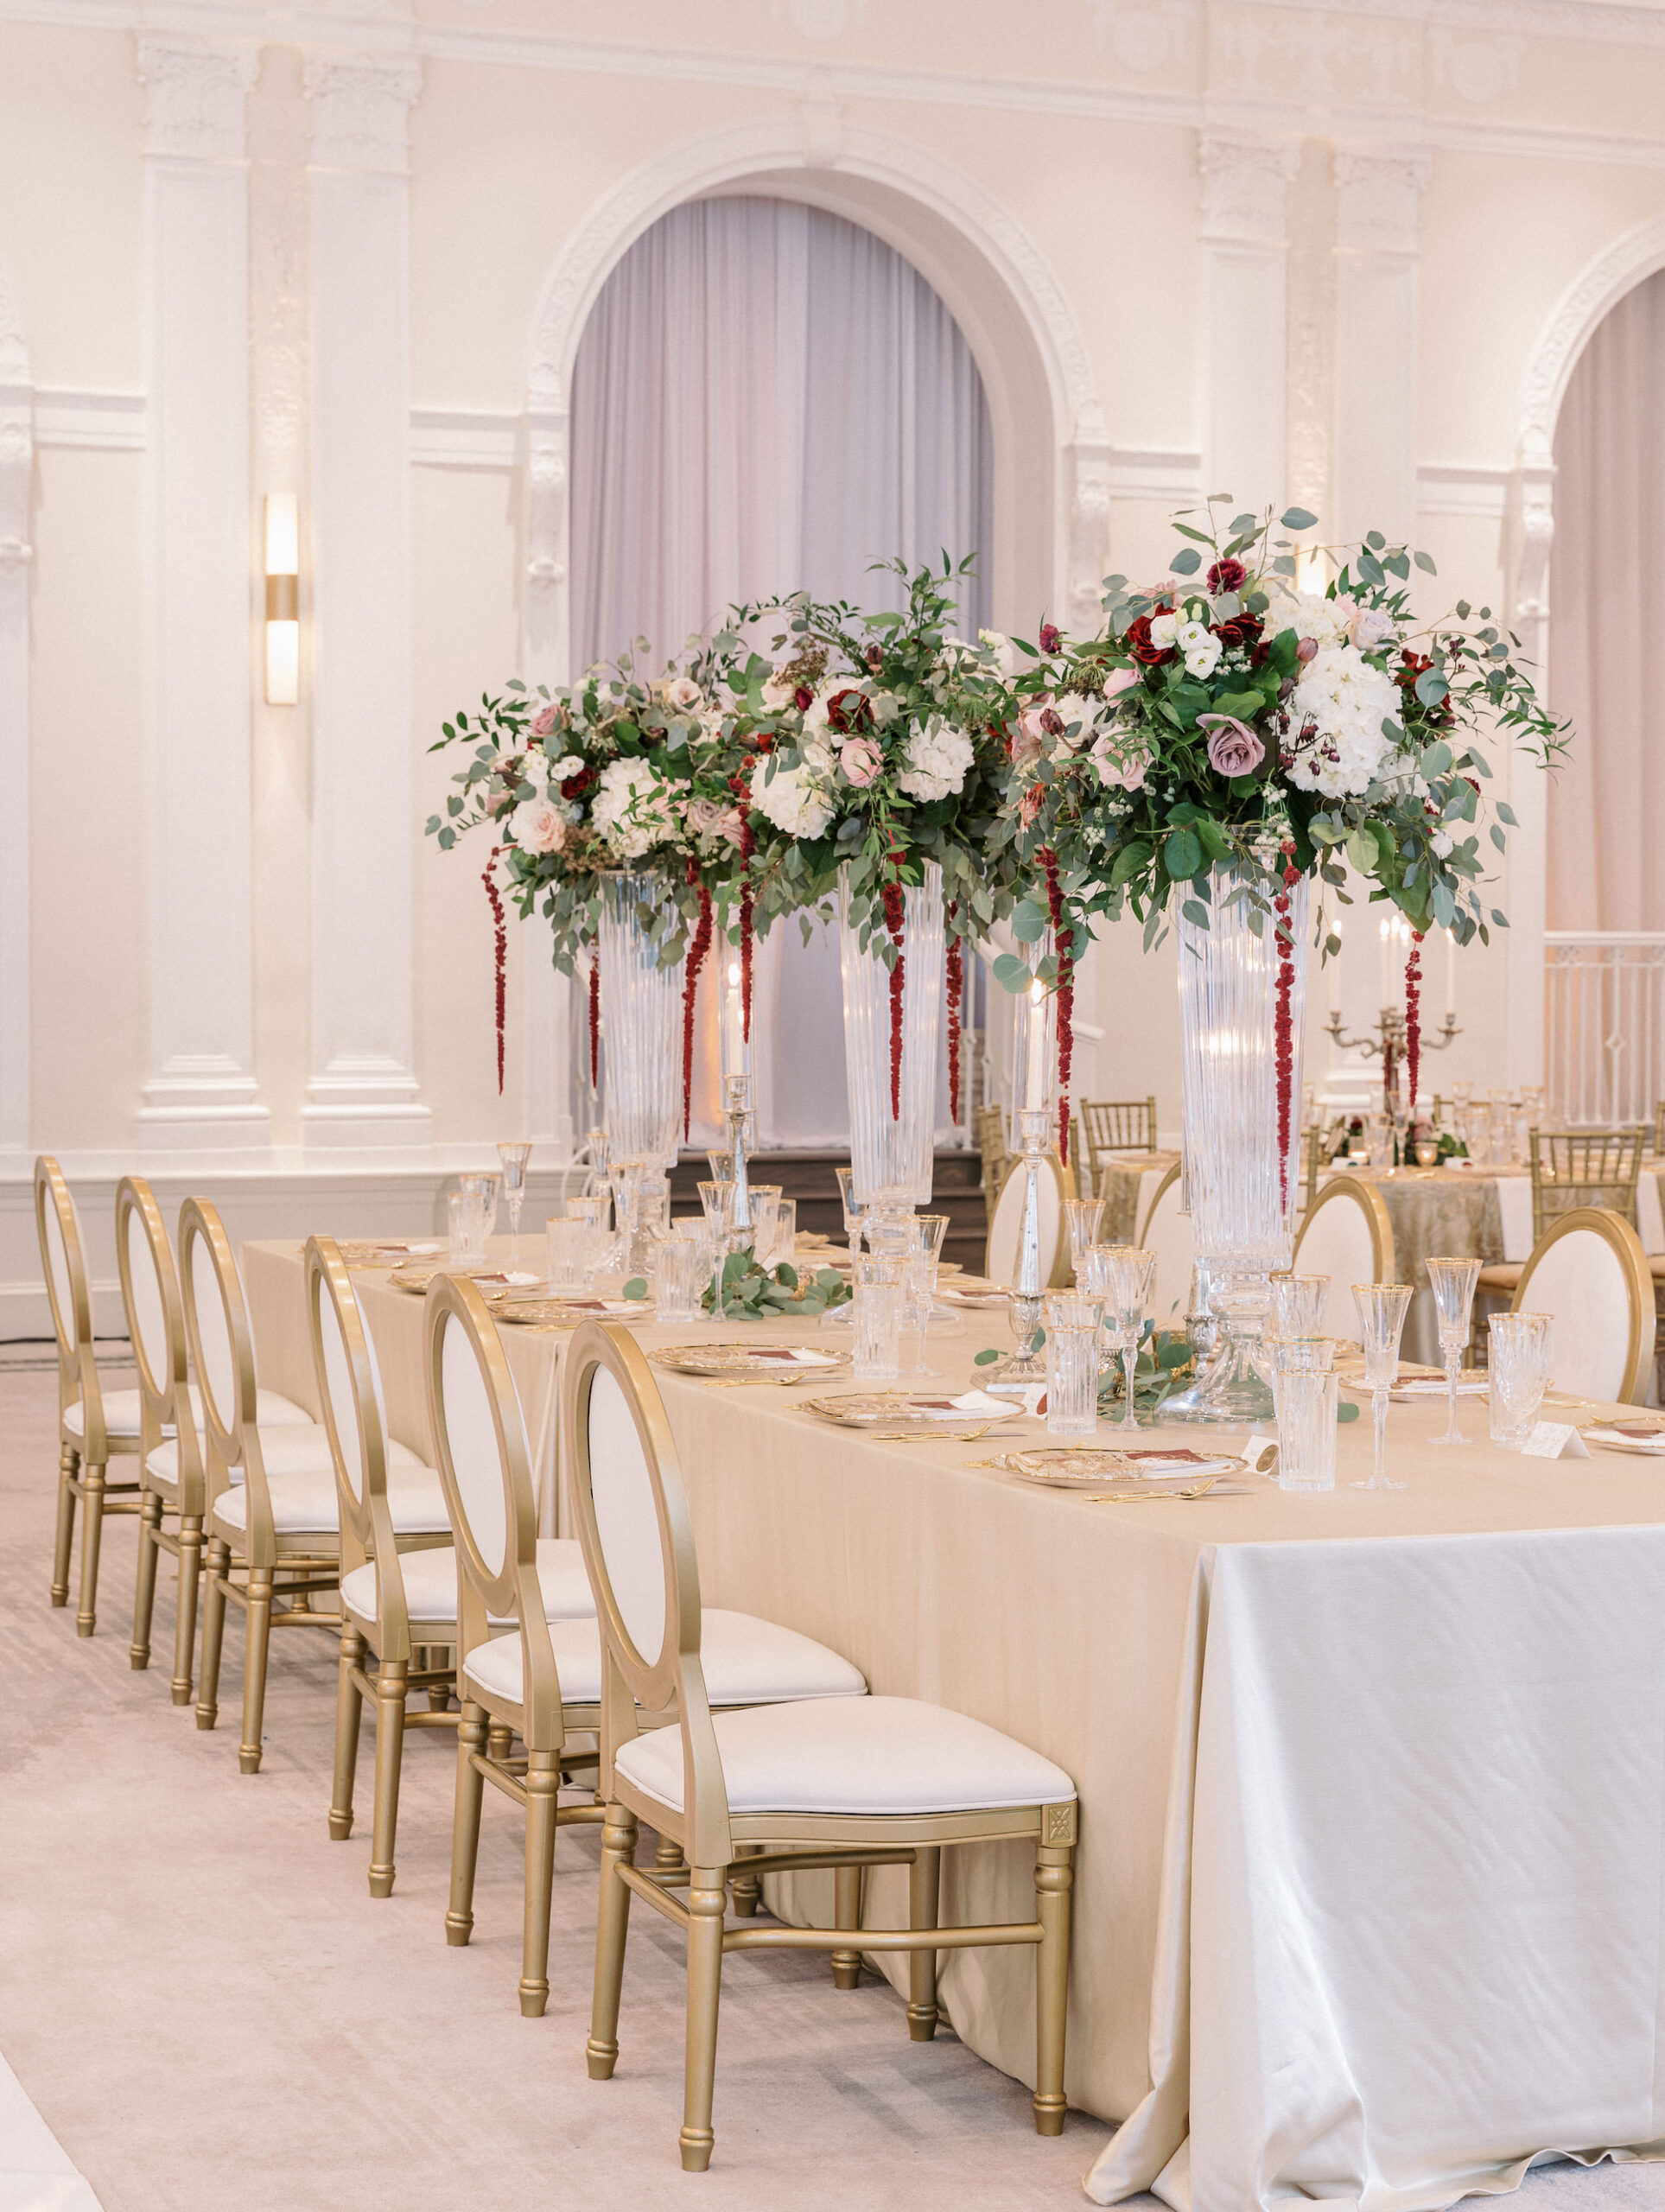 Elegant Royal Glam Gatsby Wedding Reception Decor, Long Table with Champagne Linen, Gold and Ivory Dining Chairs, Tall Glass Vases with Lush Greenery, White, Mauve, Burgundy and Blush Pink Roses with Red Hanging Amaranthus Flower Centerpieces | Tampa Bay Wedding Planner and Designer John Campbell Weddings | St. Pete Wedding Rentals Kate Ryan Event Rentals